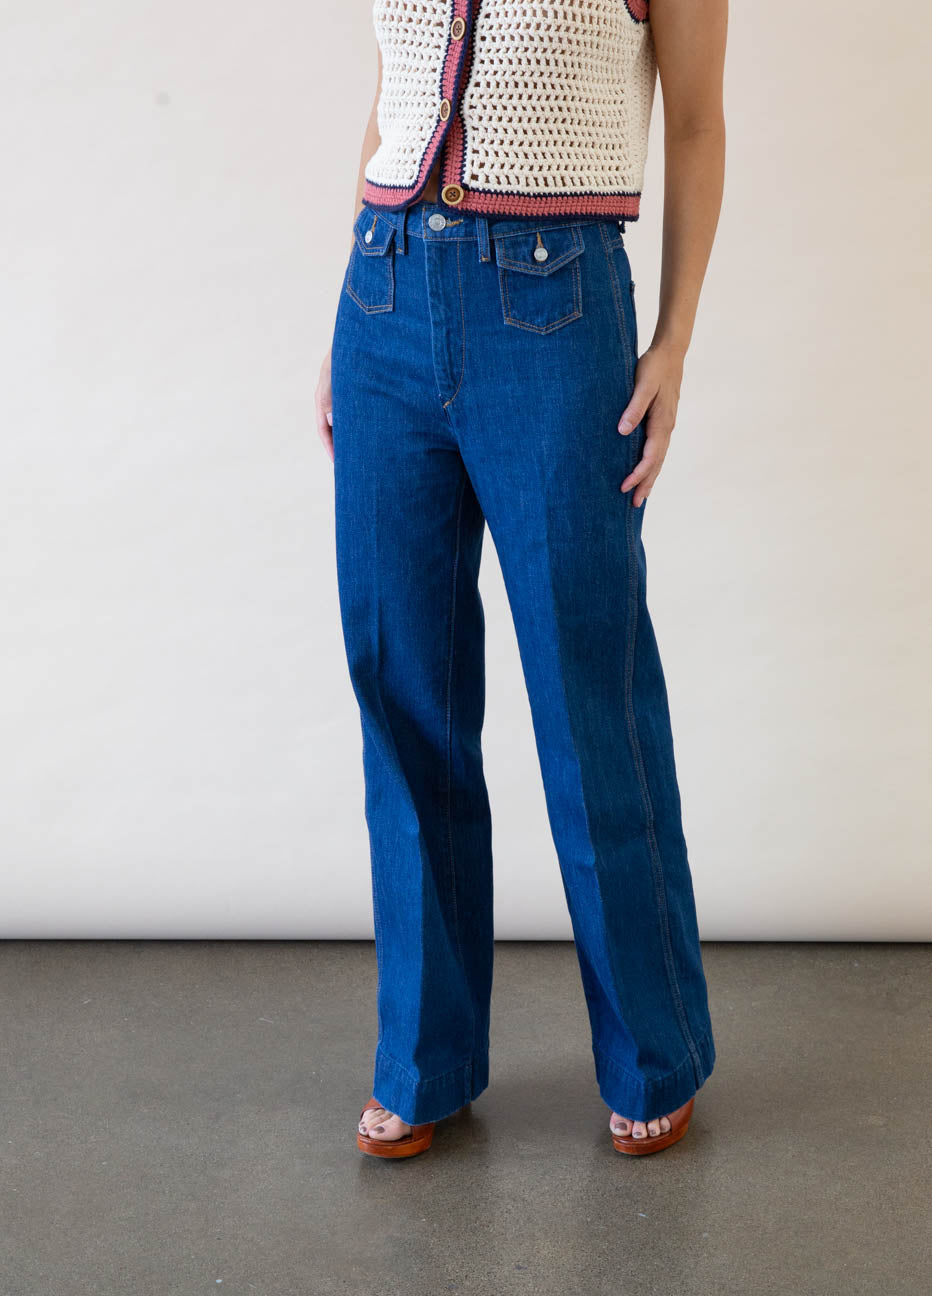 DIY 70's Wide Leg Jeans From Scratch ! How to make a pair of 1970's super wide  leg jeans from scratch !!